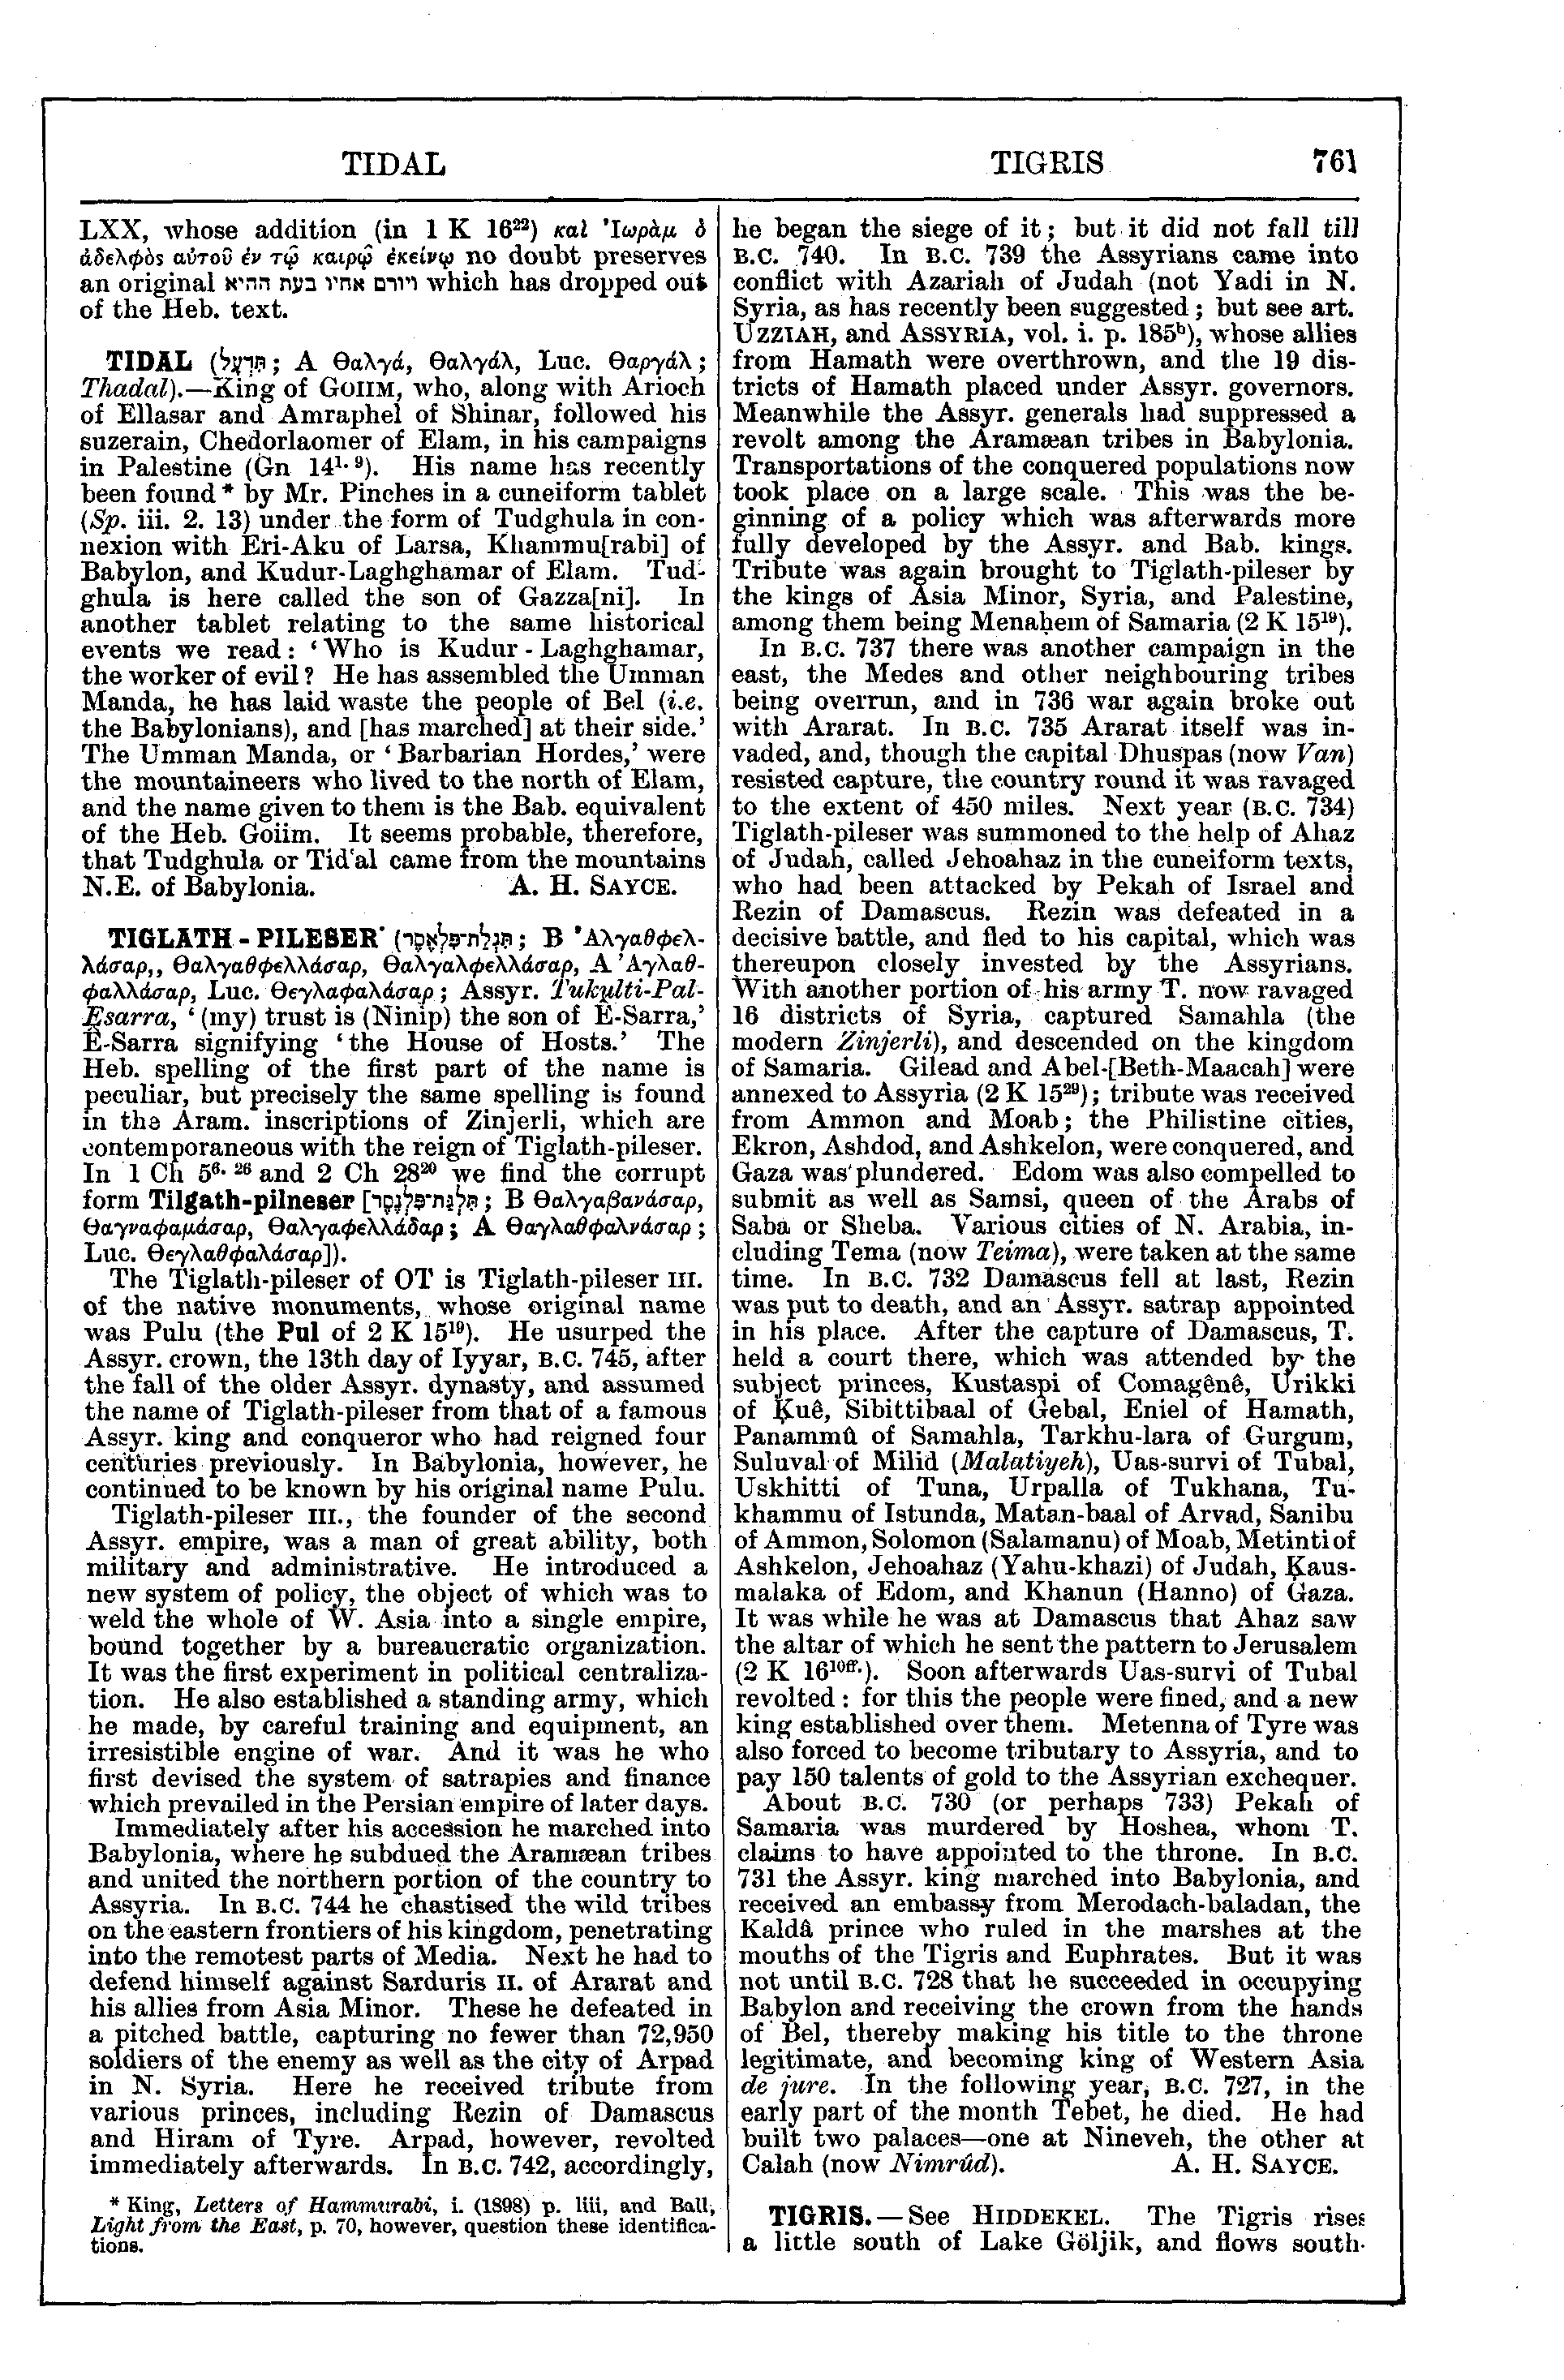 Image of page 761